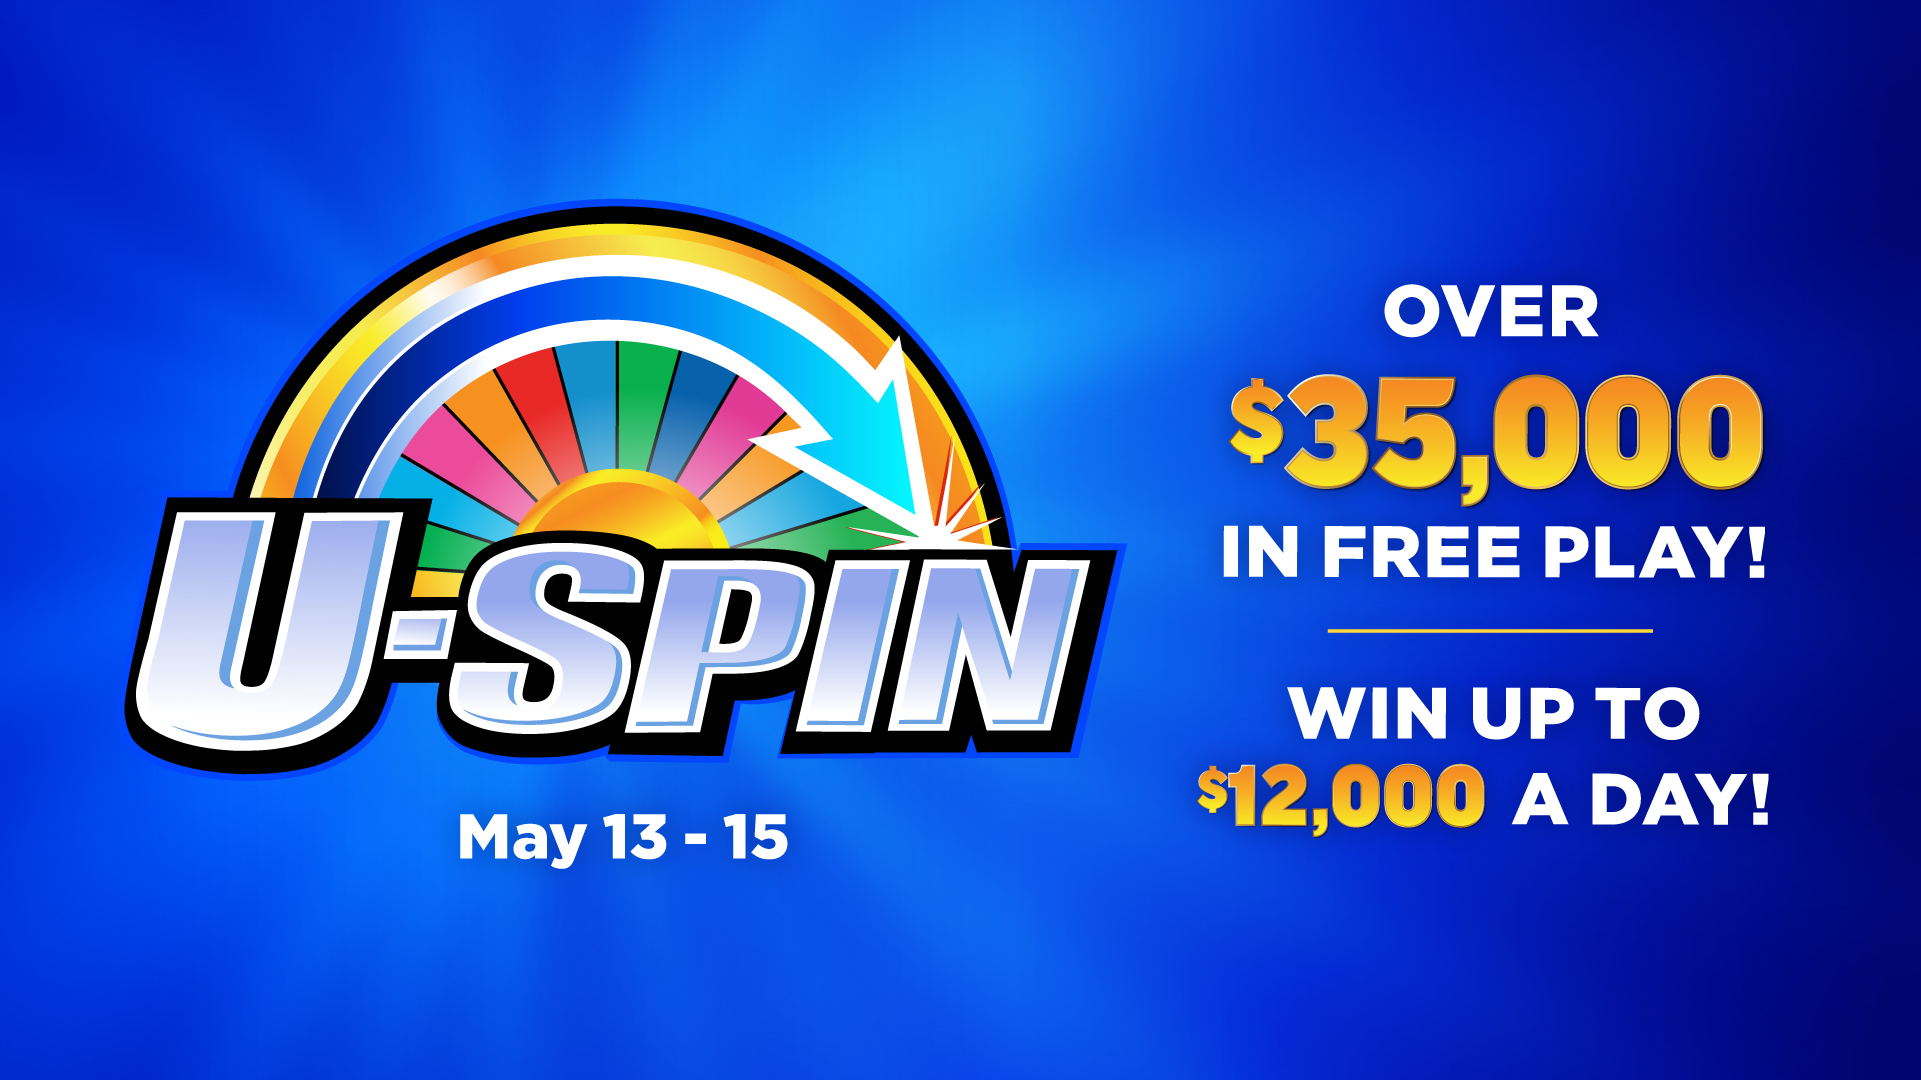 U-Spin May 13-15 Over $35,000 In Free Play! win Up to $12,000 A Day!